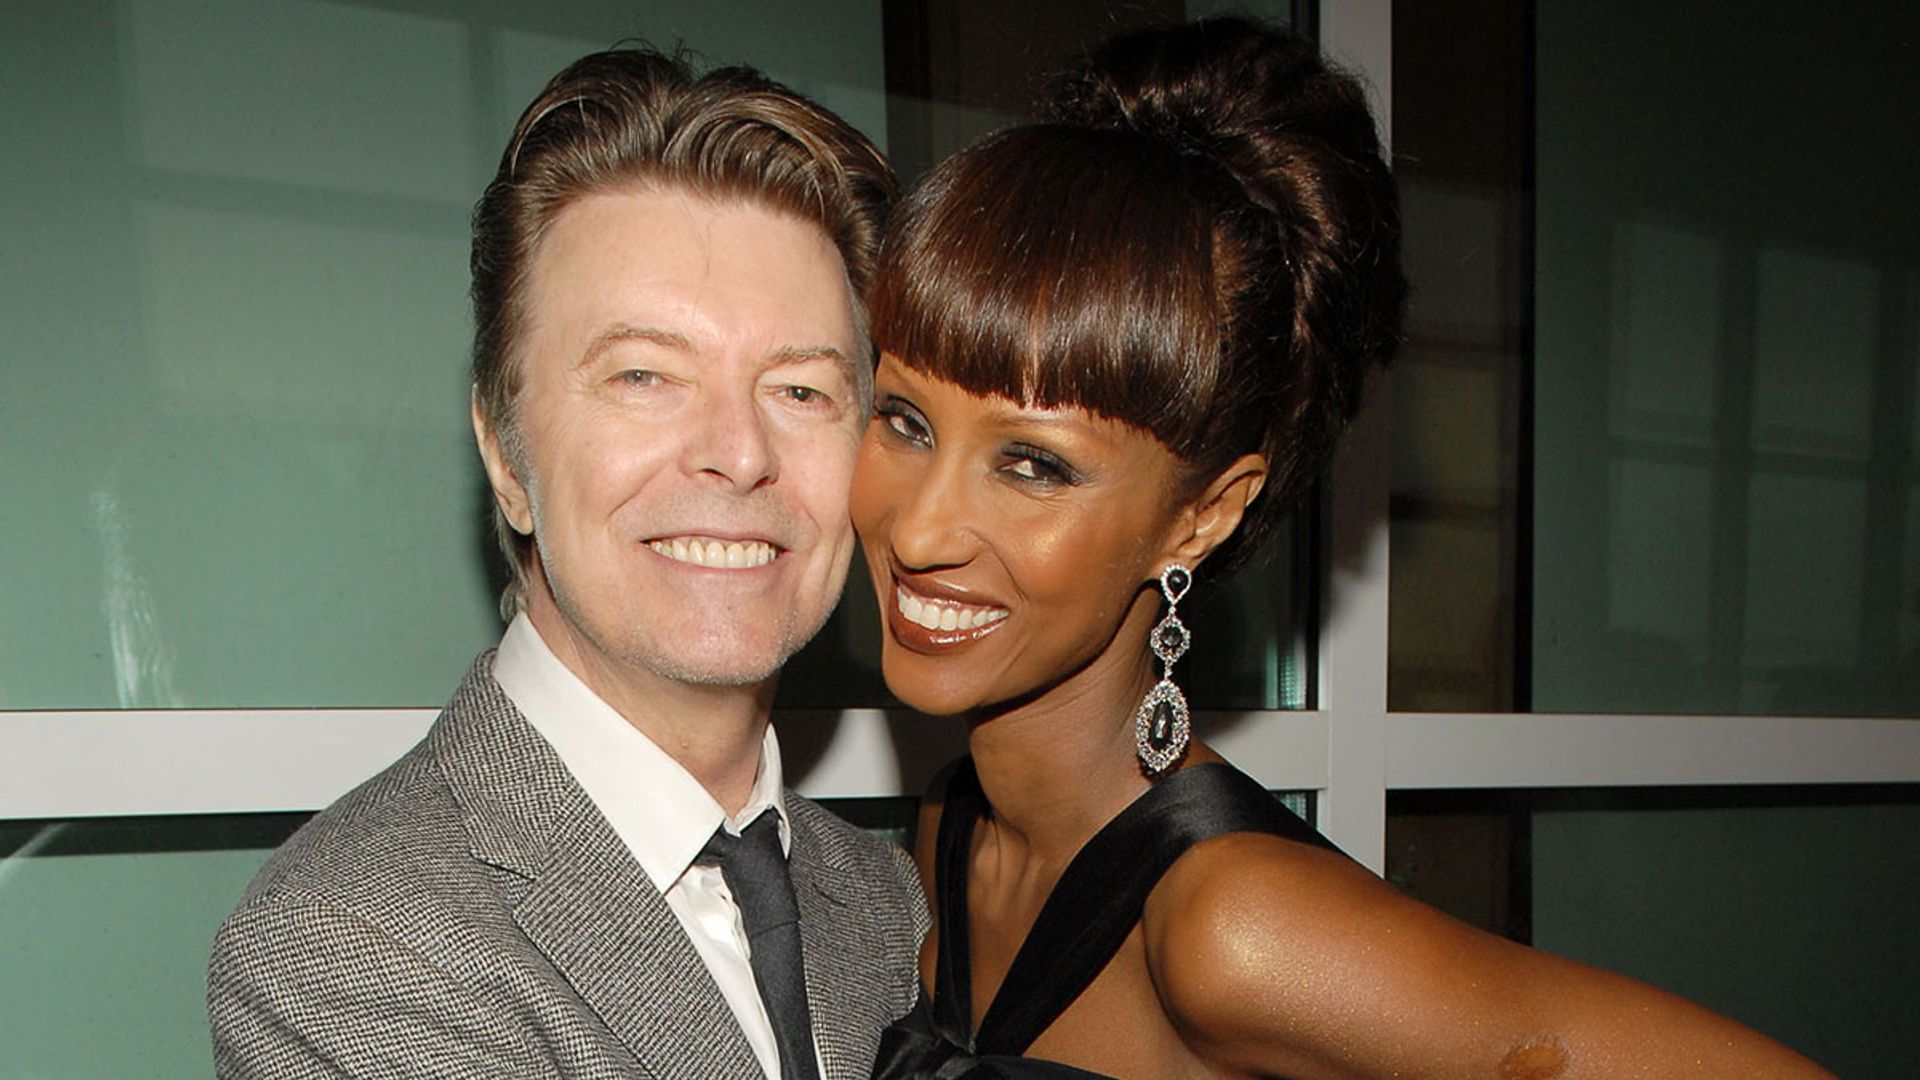 Iman shares rare picture of her daughter with David Bowie and fans go wild